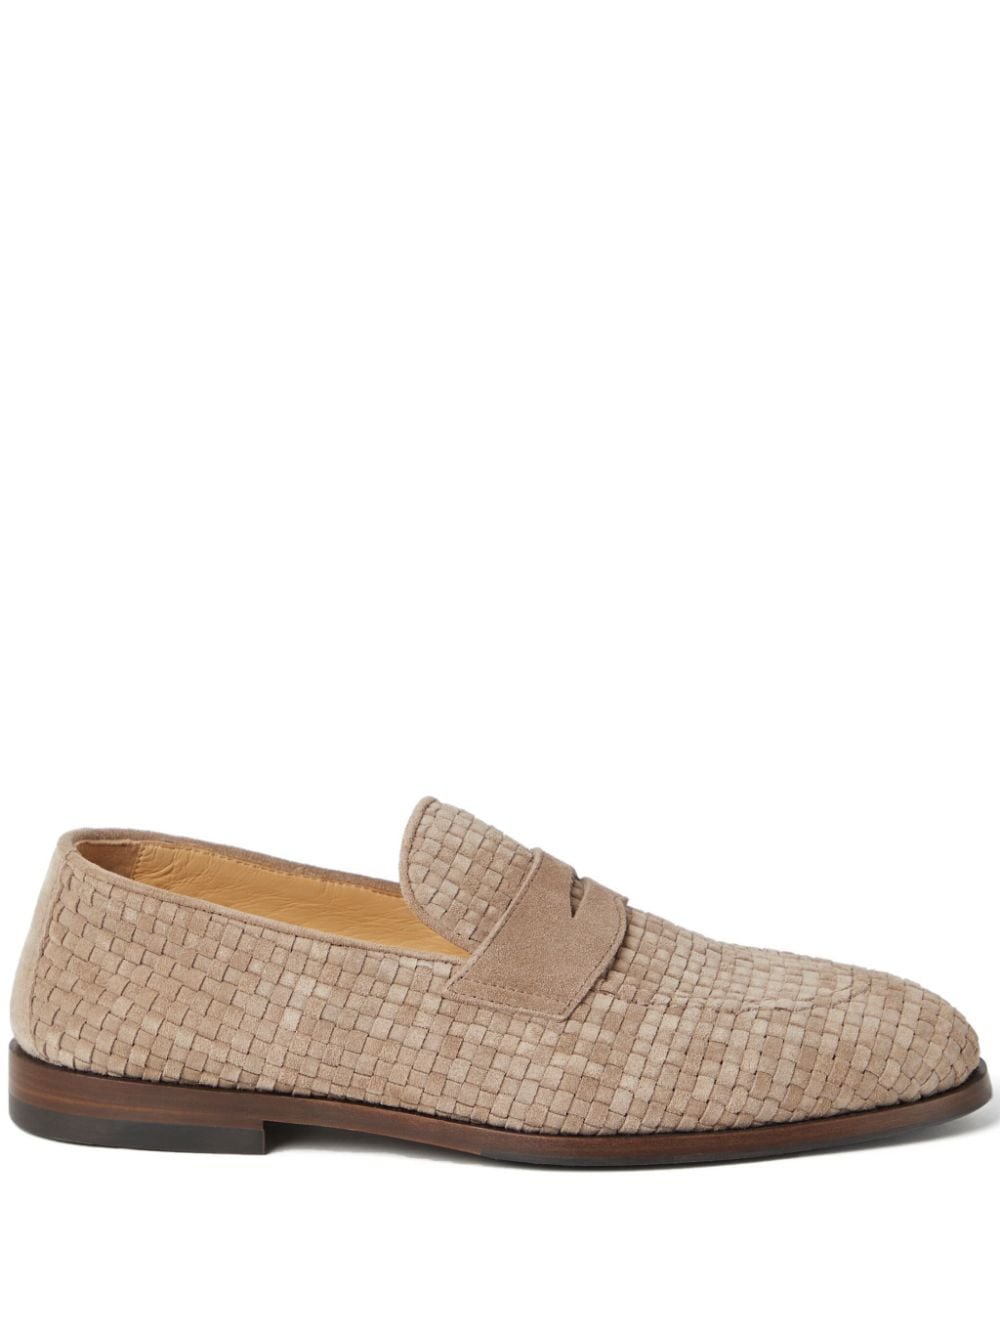 Brunello Cucinelli Woven Suede Loafers In Brown